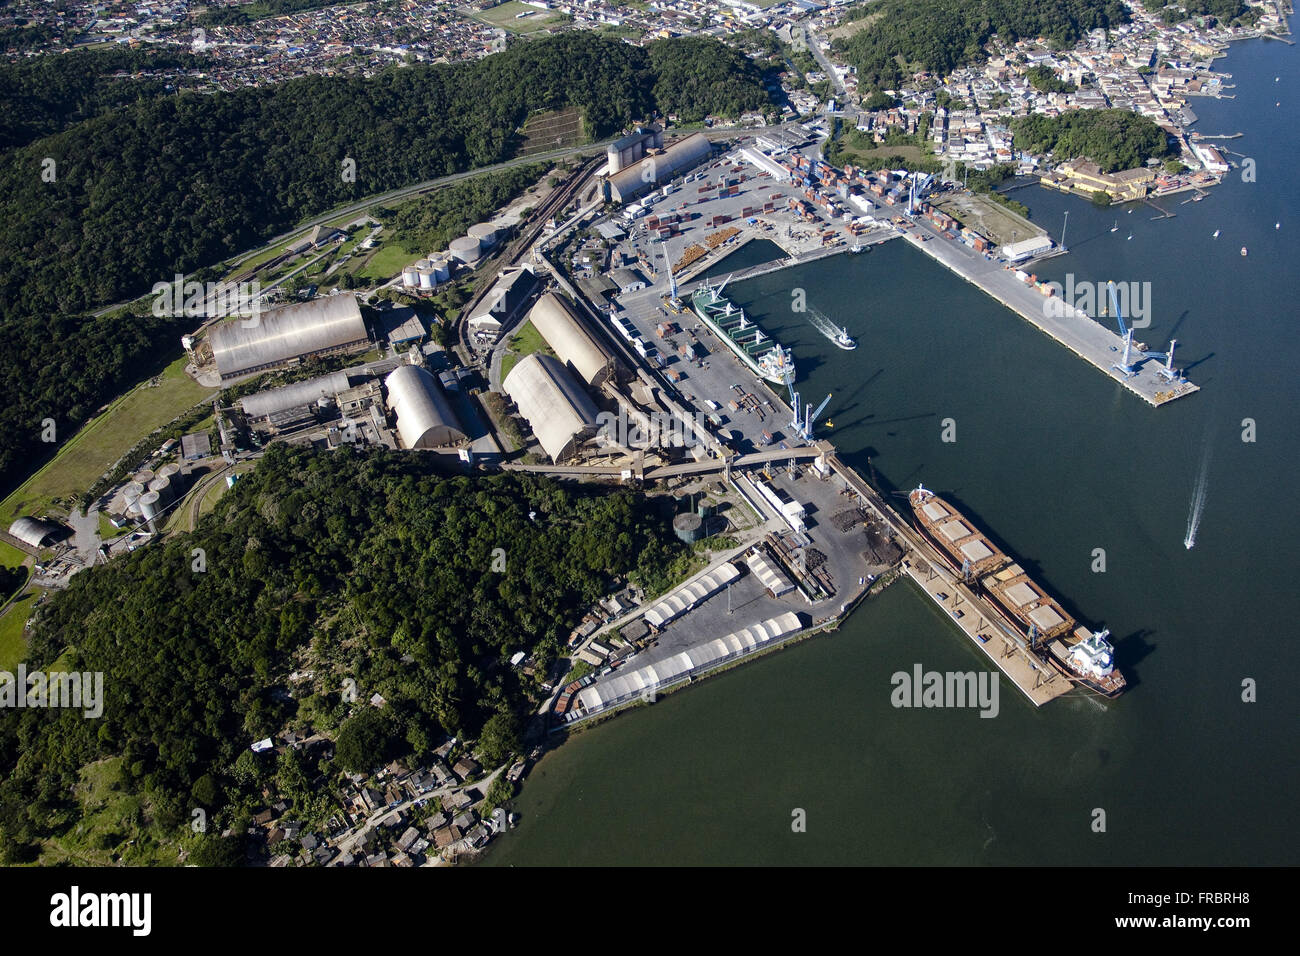 Aerial view of the port city in the Bay Babitonga Stock Photo